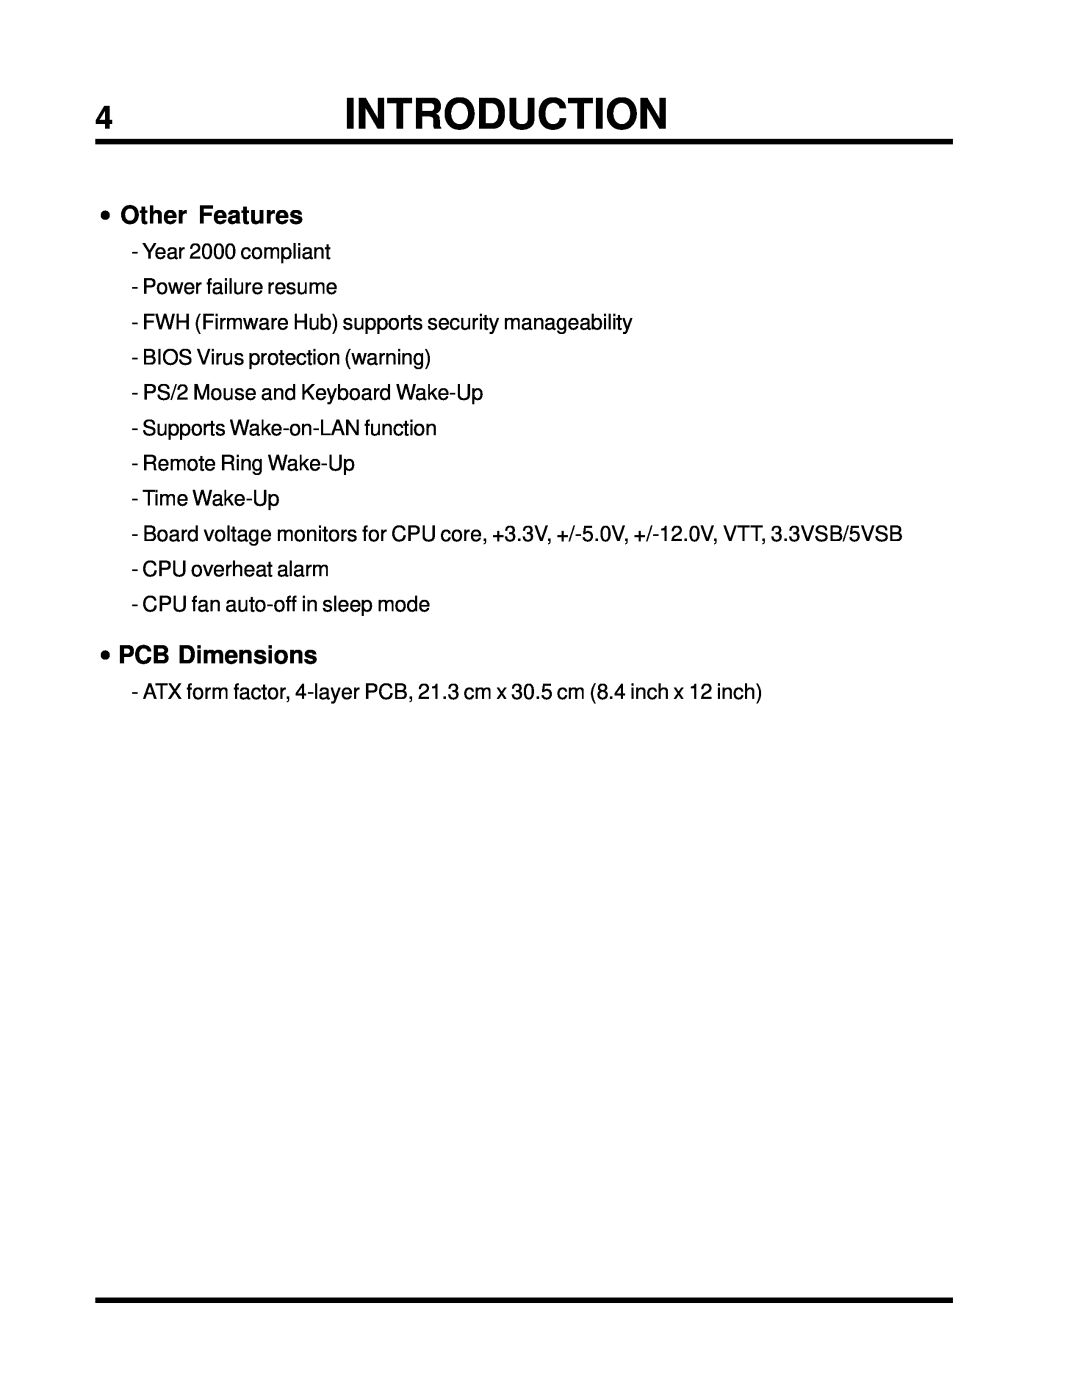 Intel TS-ASP3 user manual 4INTRODUCTION, •Other Features, •PCB Dimensions 